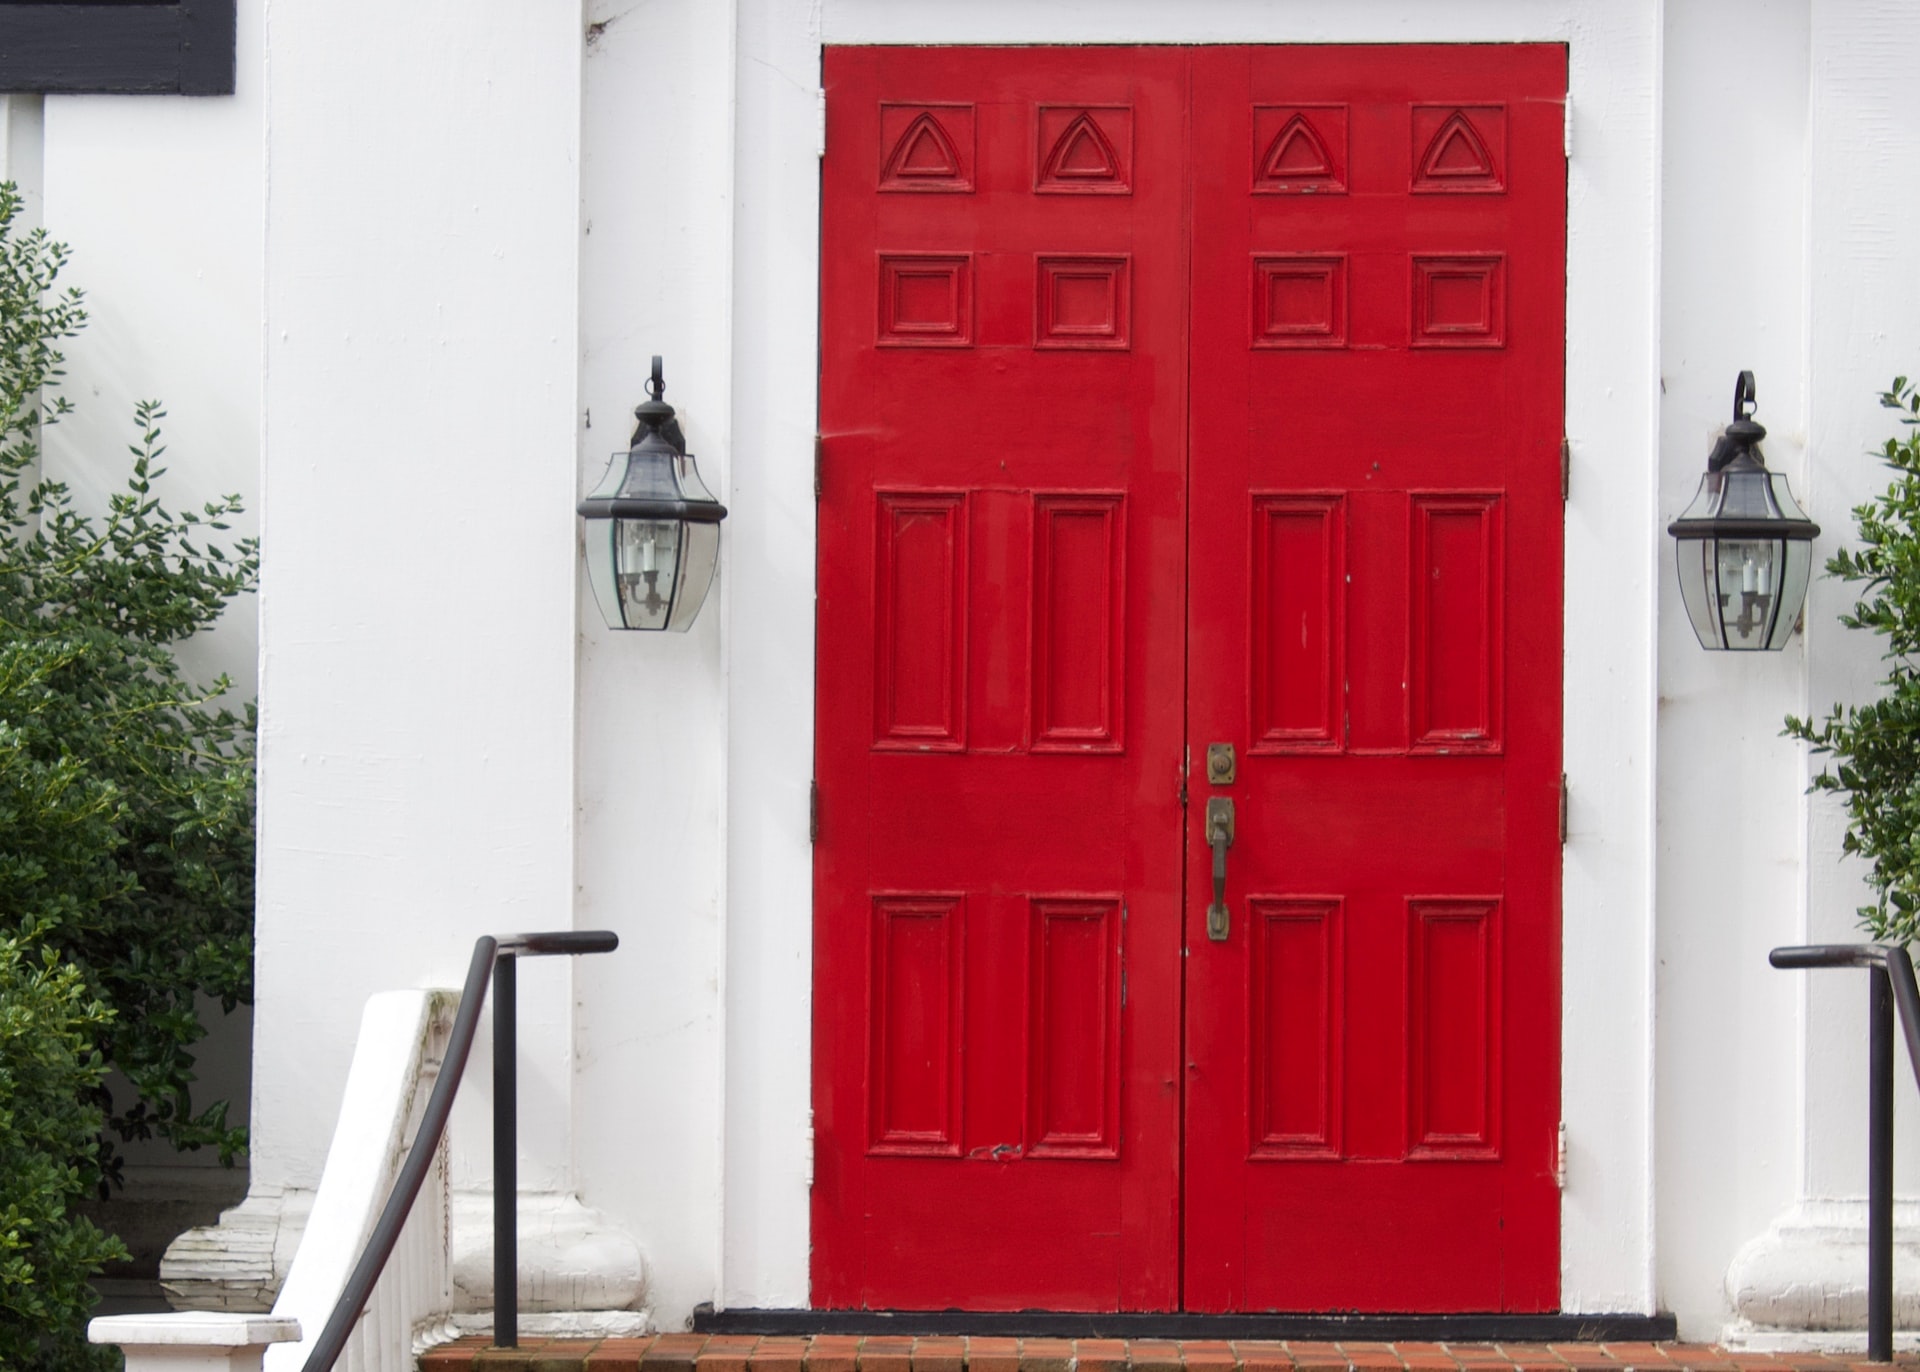 Red double external doors on a white house